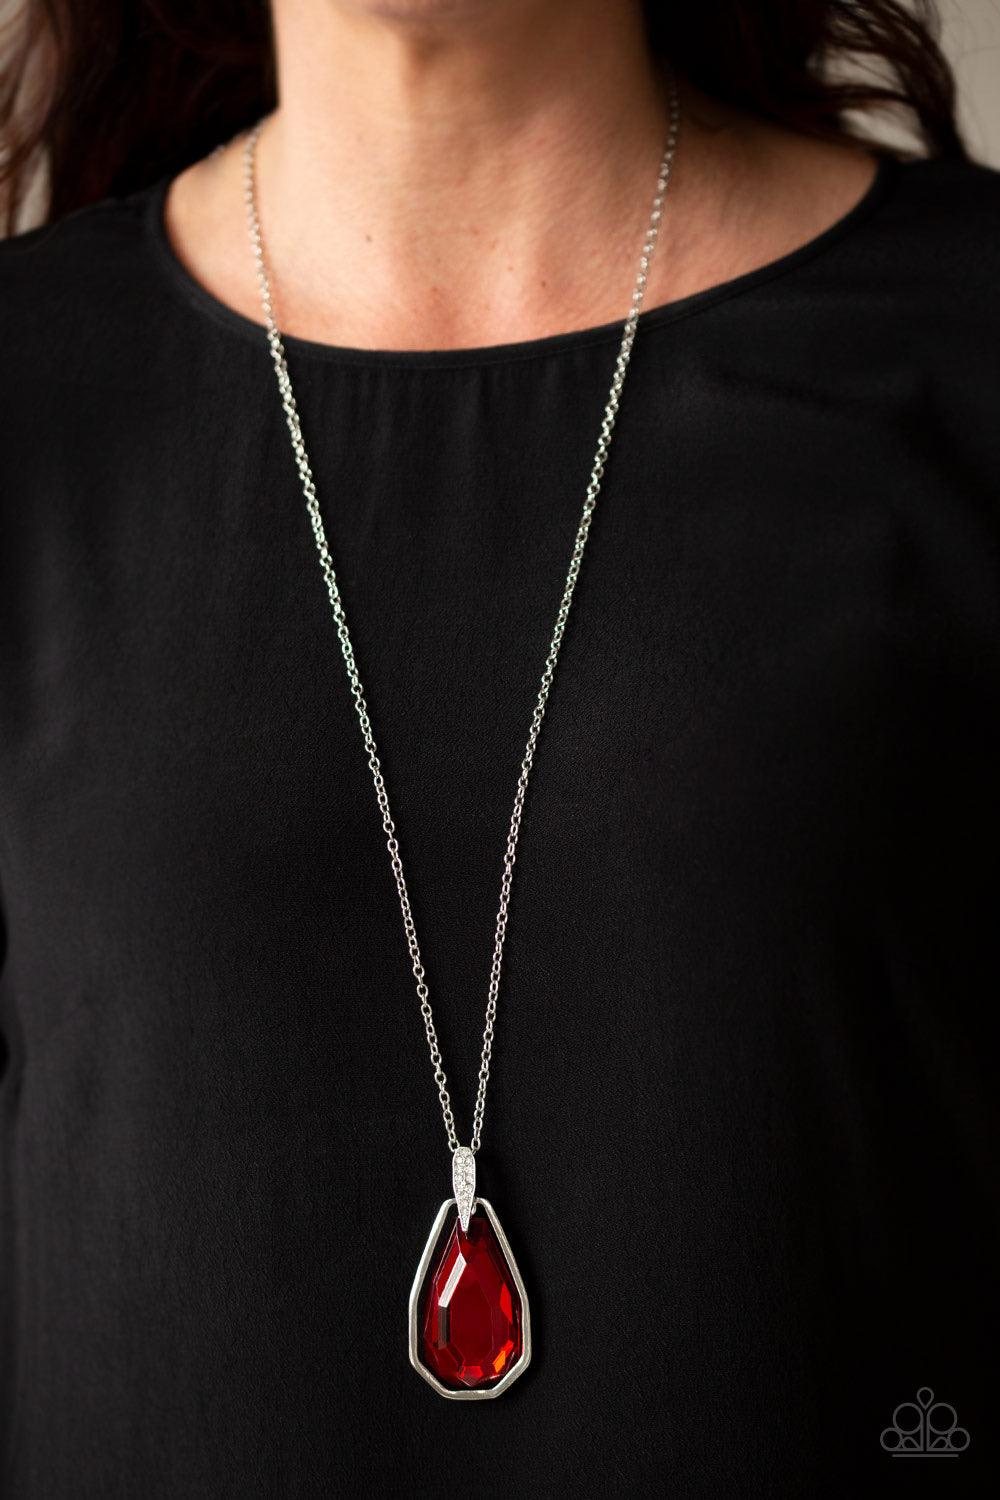 Paparazzi Accessories Maven Magic - Red A dramatically oversized red gem and edgy silver frame swing from a glassy white rhinestone fitting at the bottom of a lengthened silver chain for a glamorous look. Features an adjustable clasp closure. Jewelry